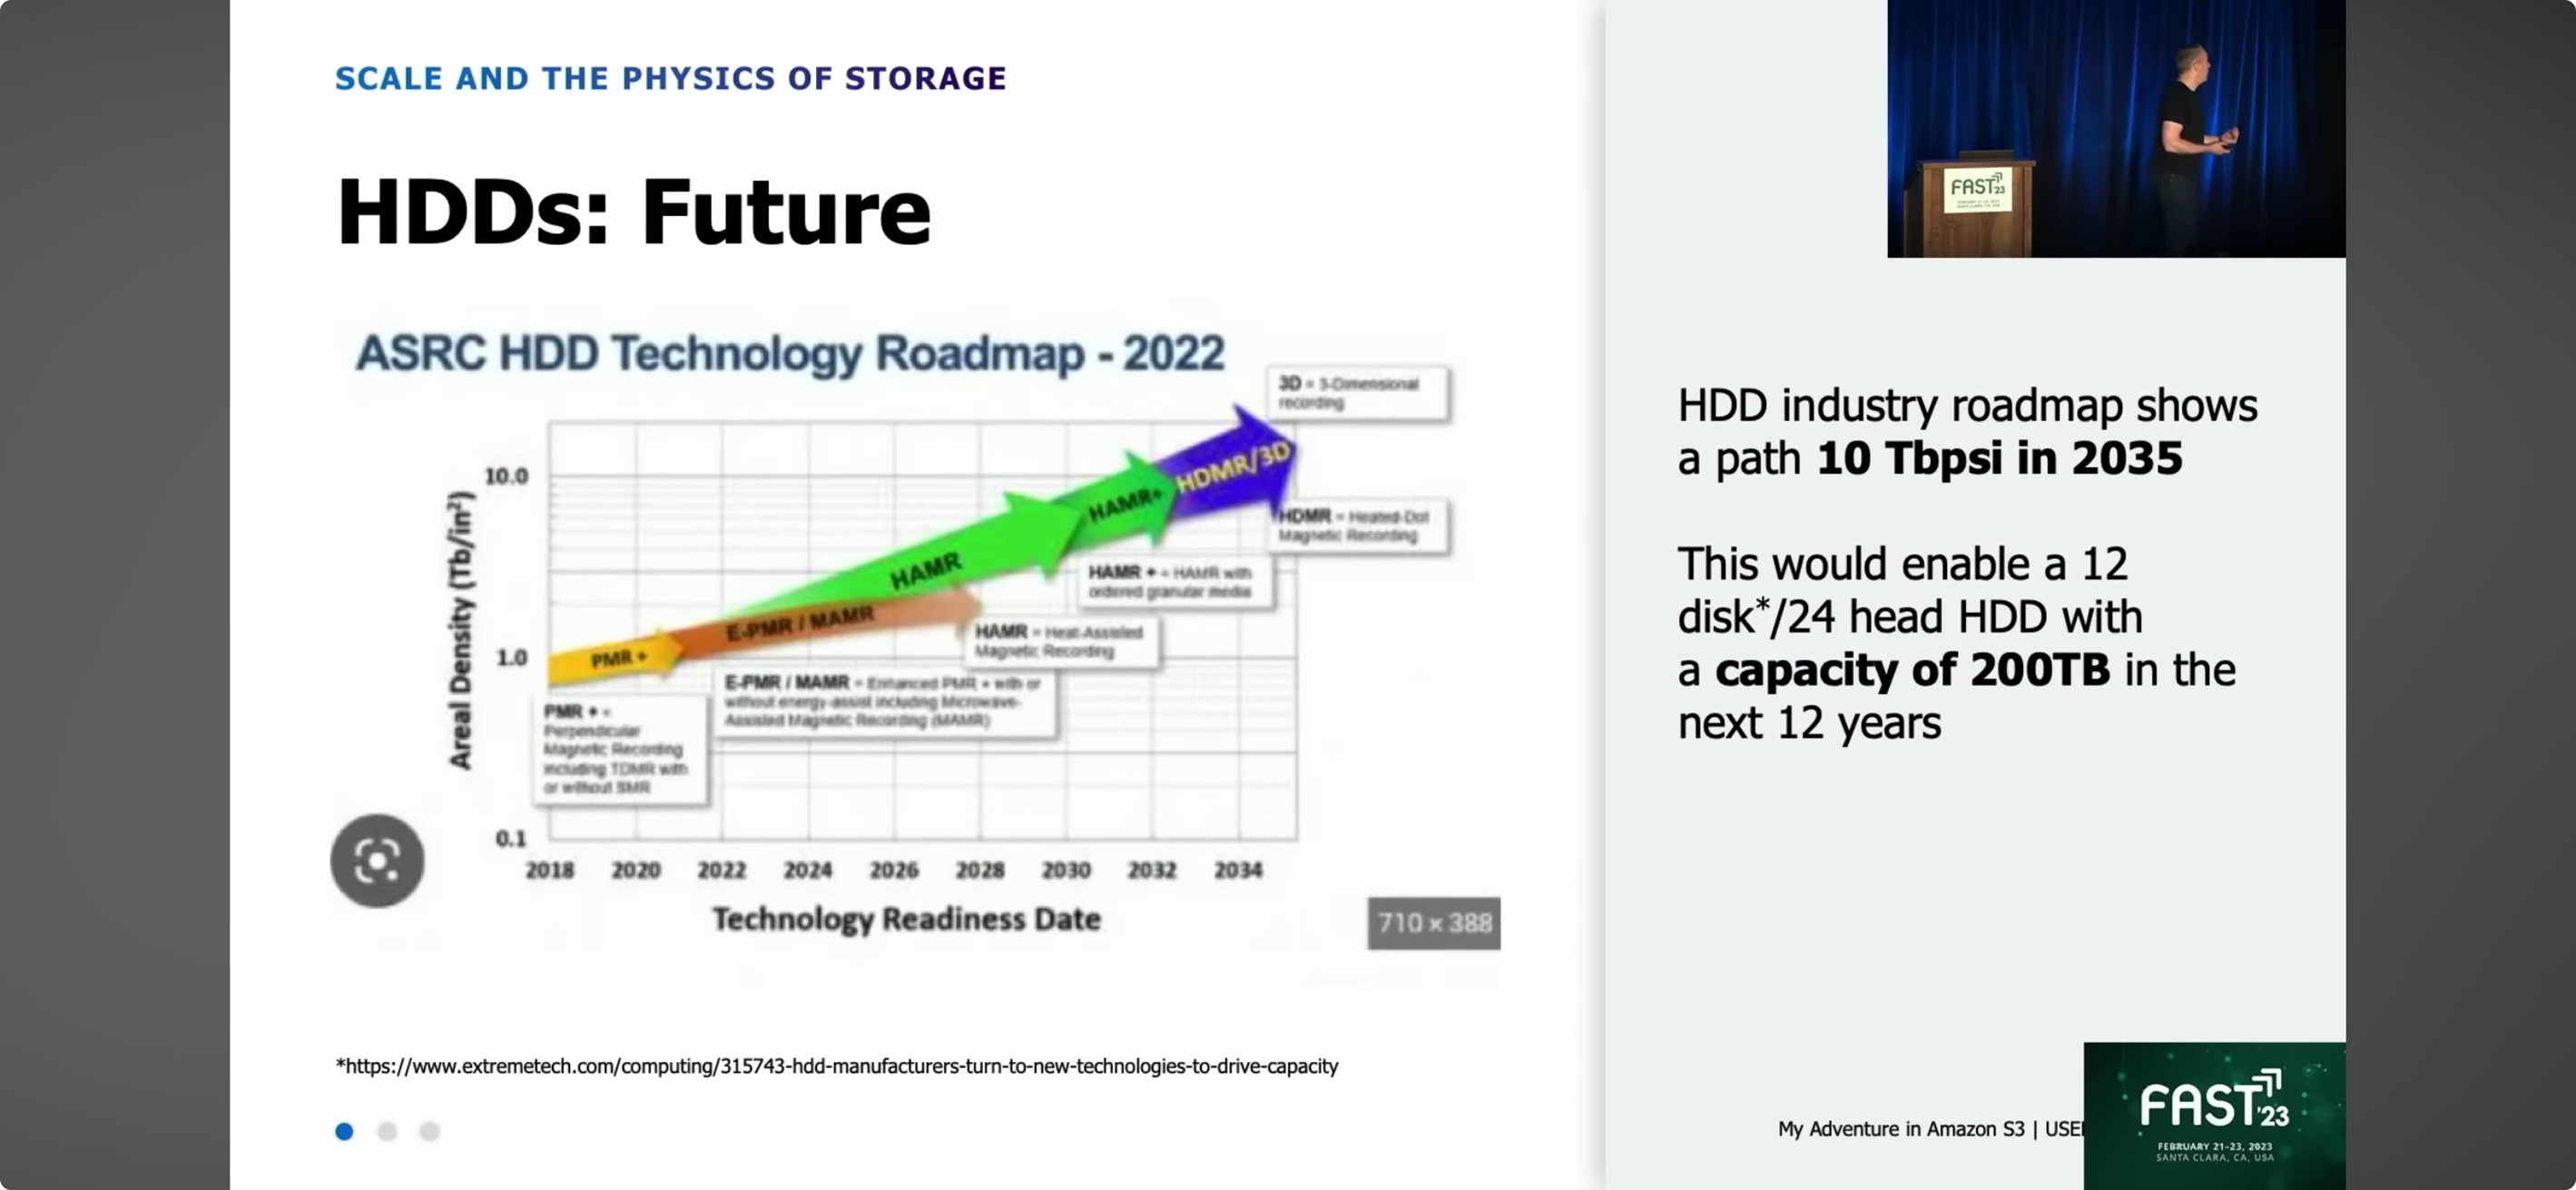 HDDs: Future